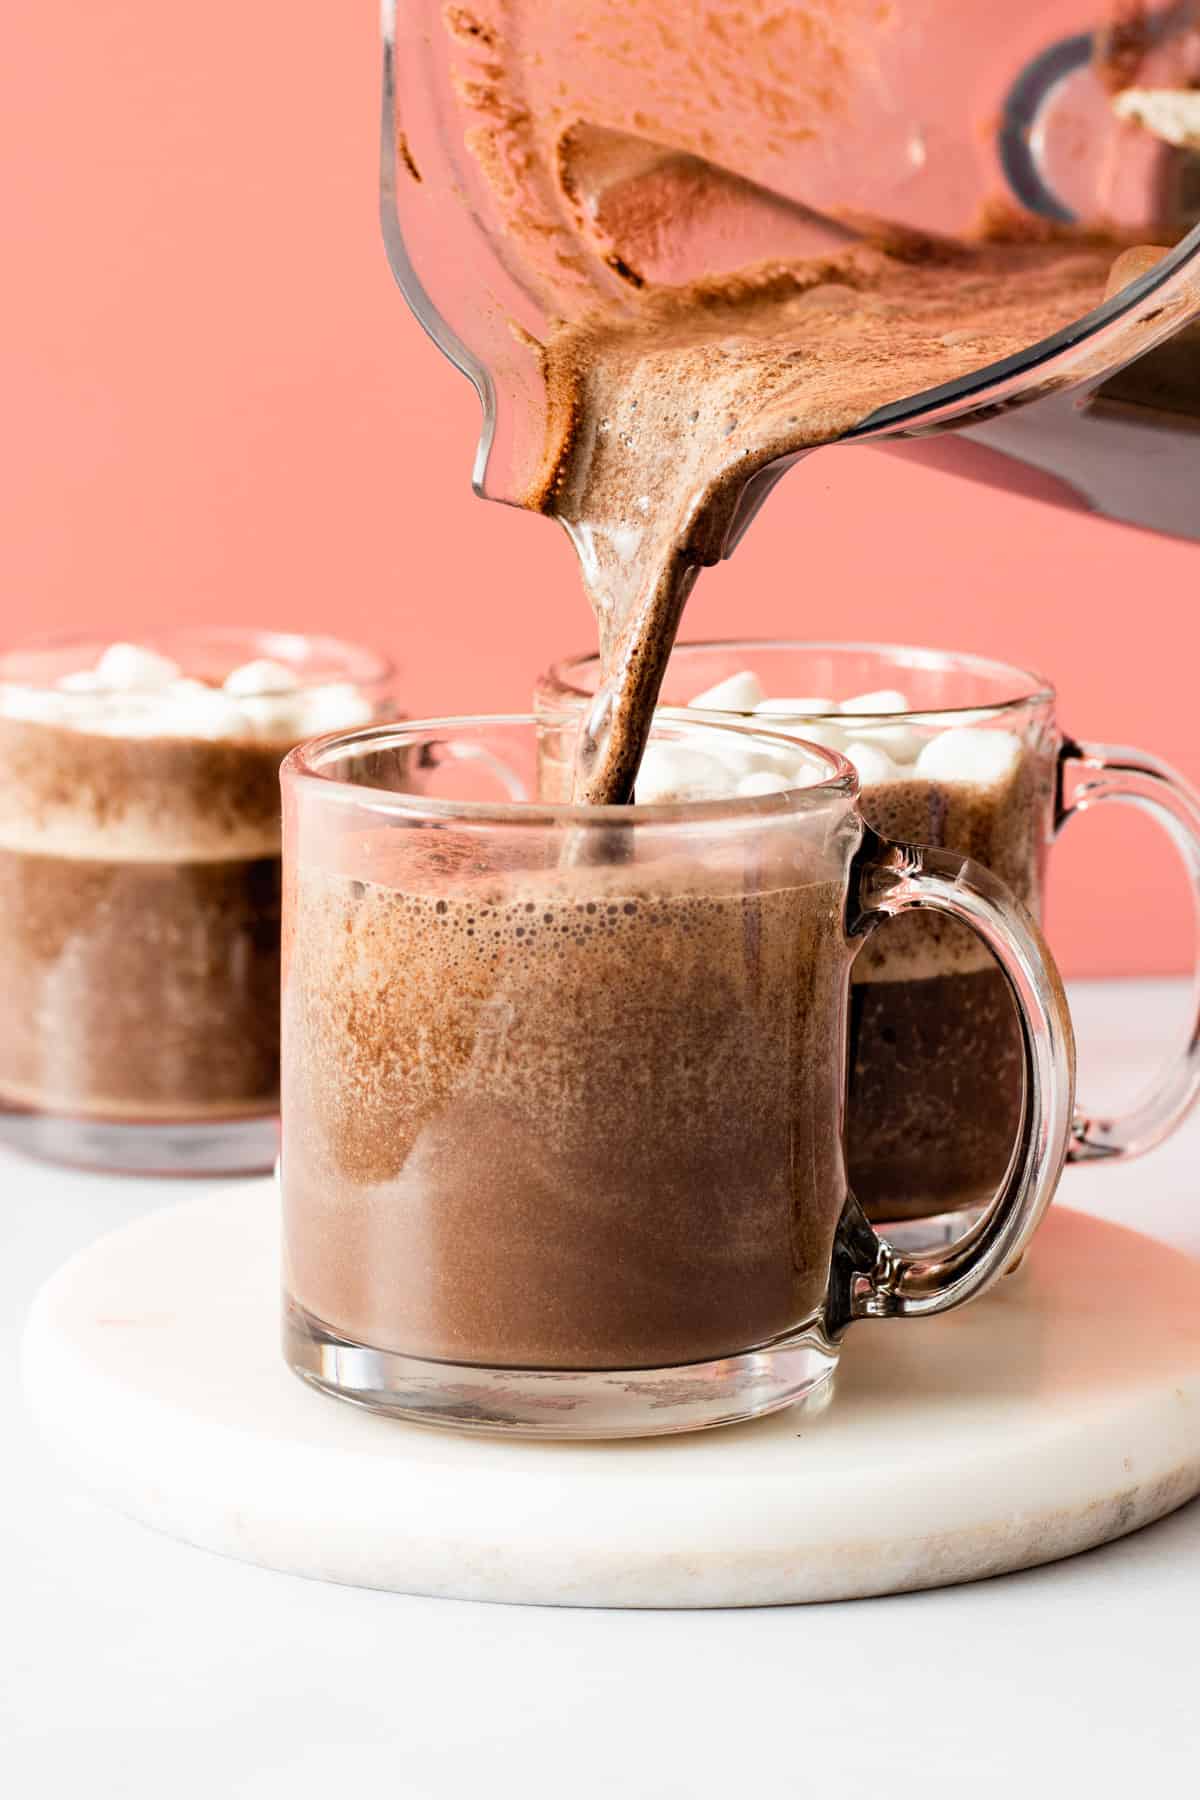 Pouring hot chocolate into clear glass mug.